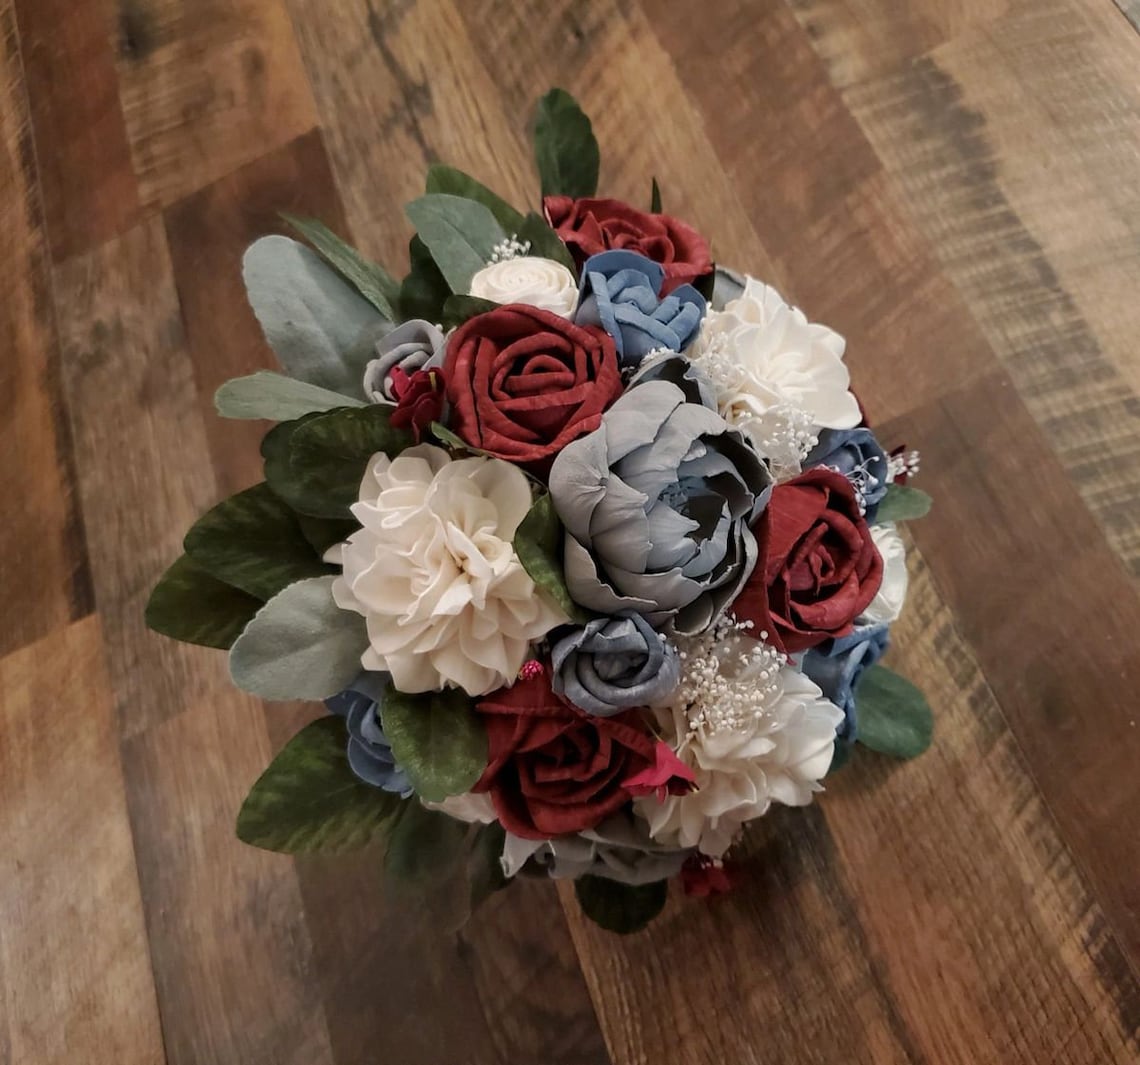 Burgundy, Gray and Dusty Blue Sola Wood Flower Bridal Bouquet with Hydrangeas, Roses and Peonies